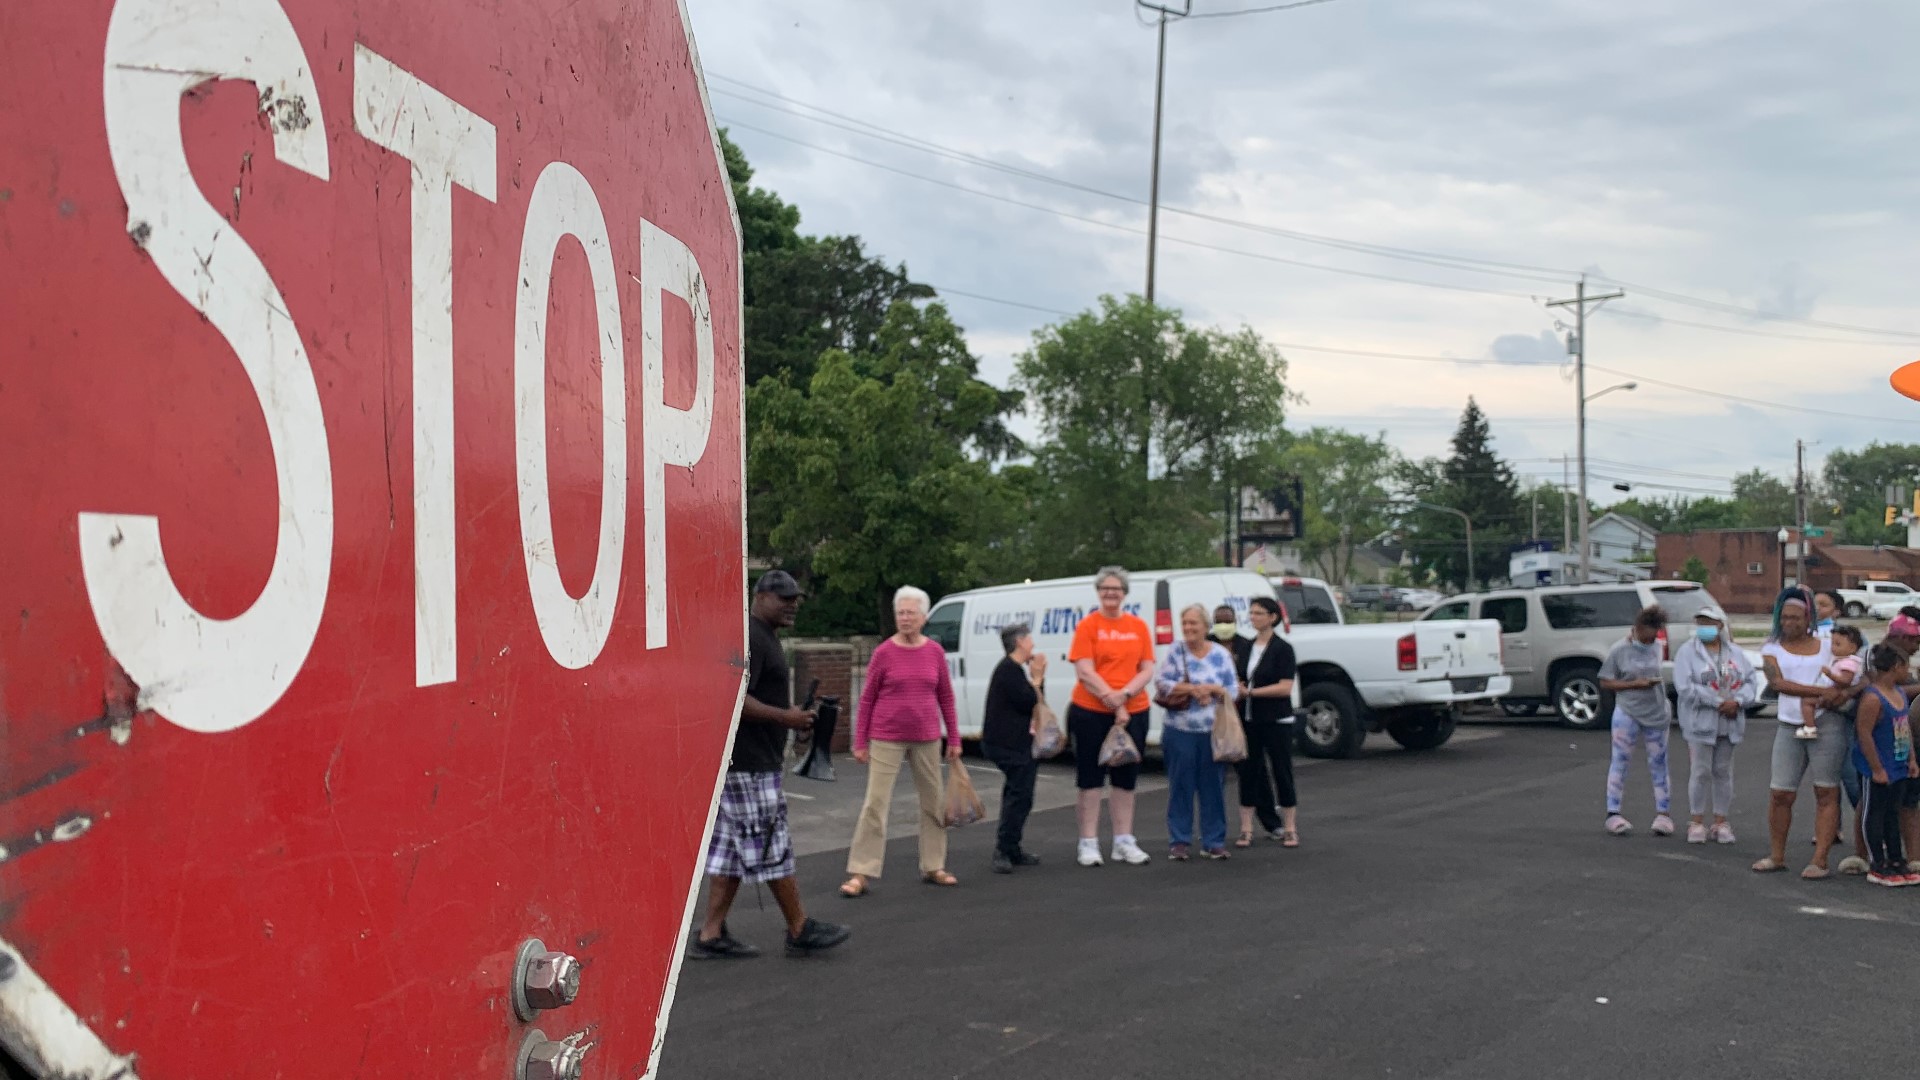 For the last several weeks, the Linden Community & Columbus Ohio Stop the Violence has walked in the neighborhood, urging people to put down the guns.